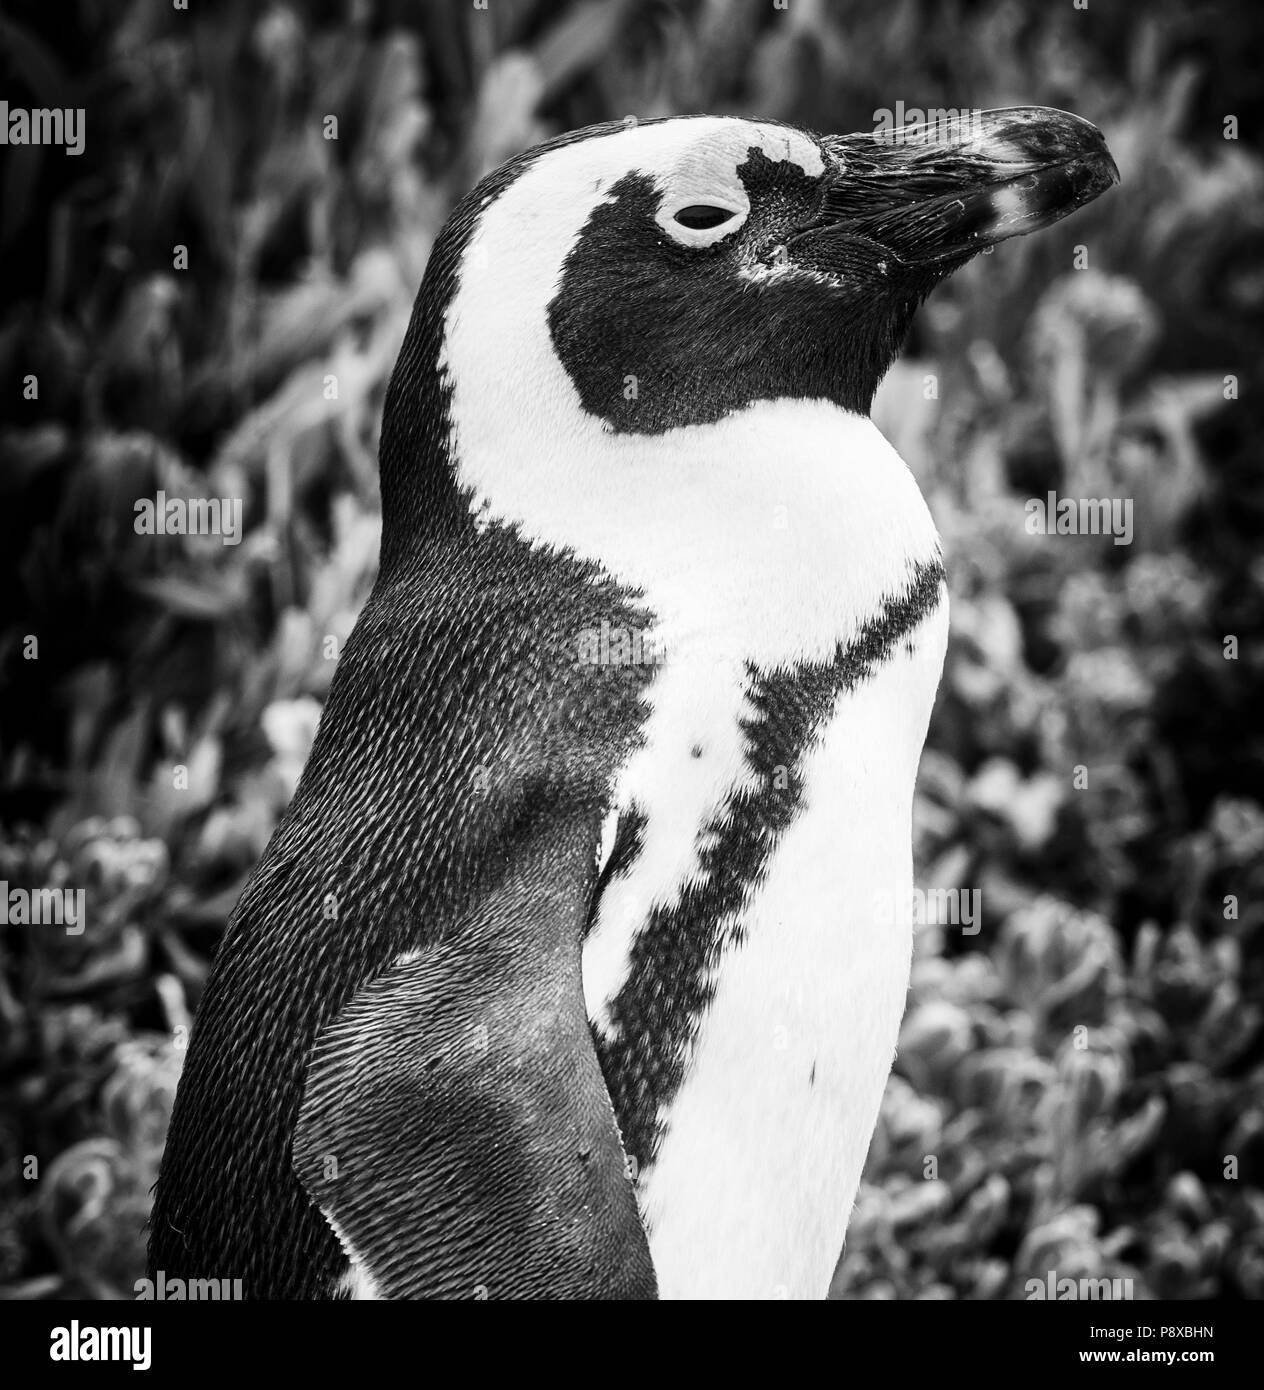 A close up of an African Penguin (spheniscus demersus) in its natural environment in Cape Town, South Africa in black and white Stock Photo